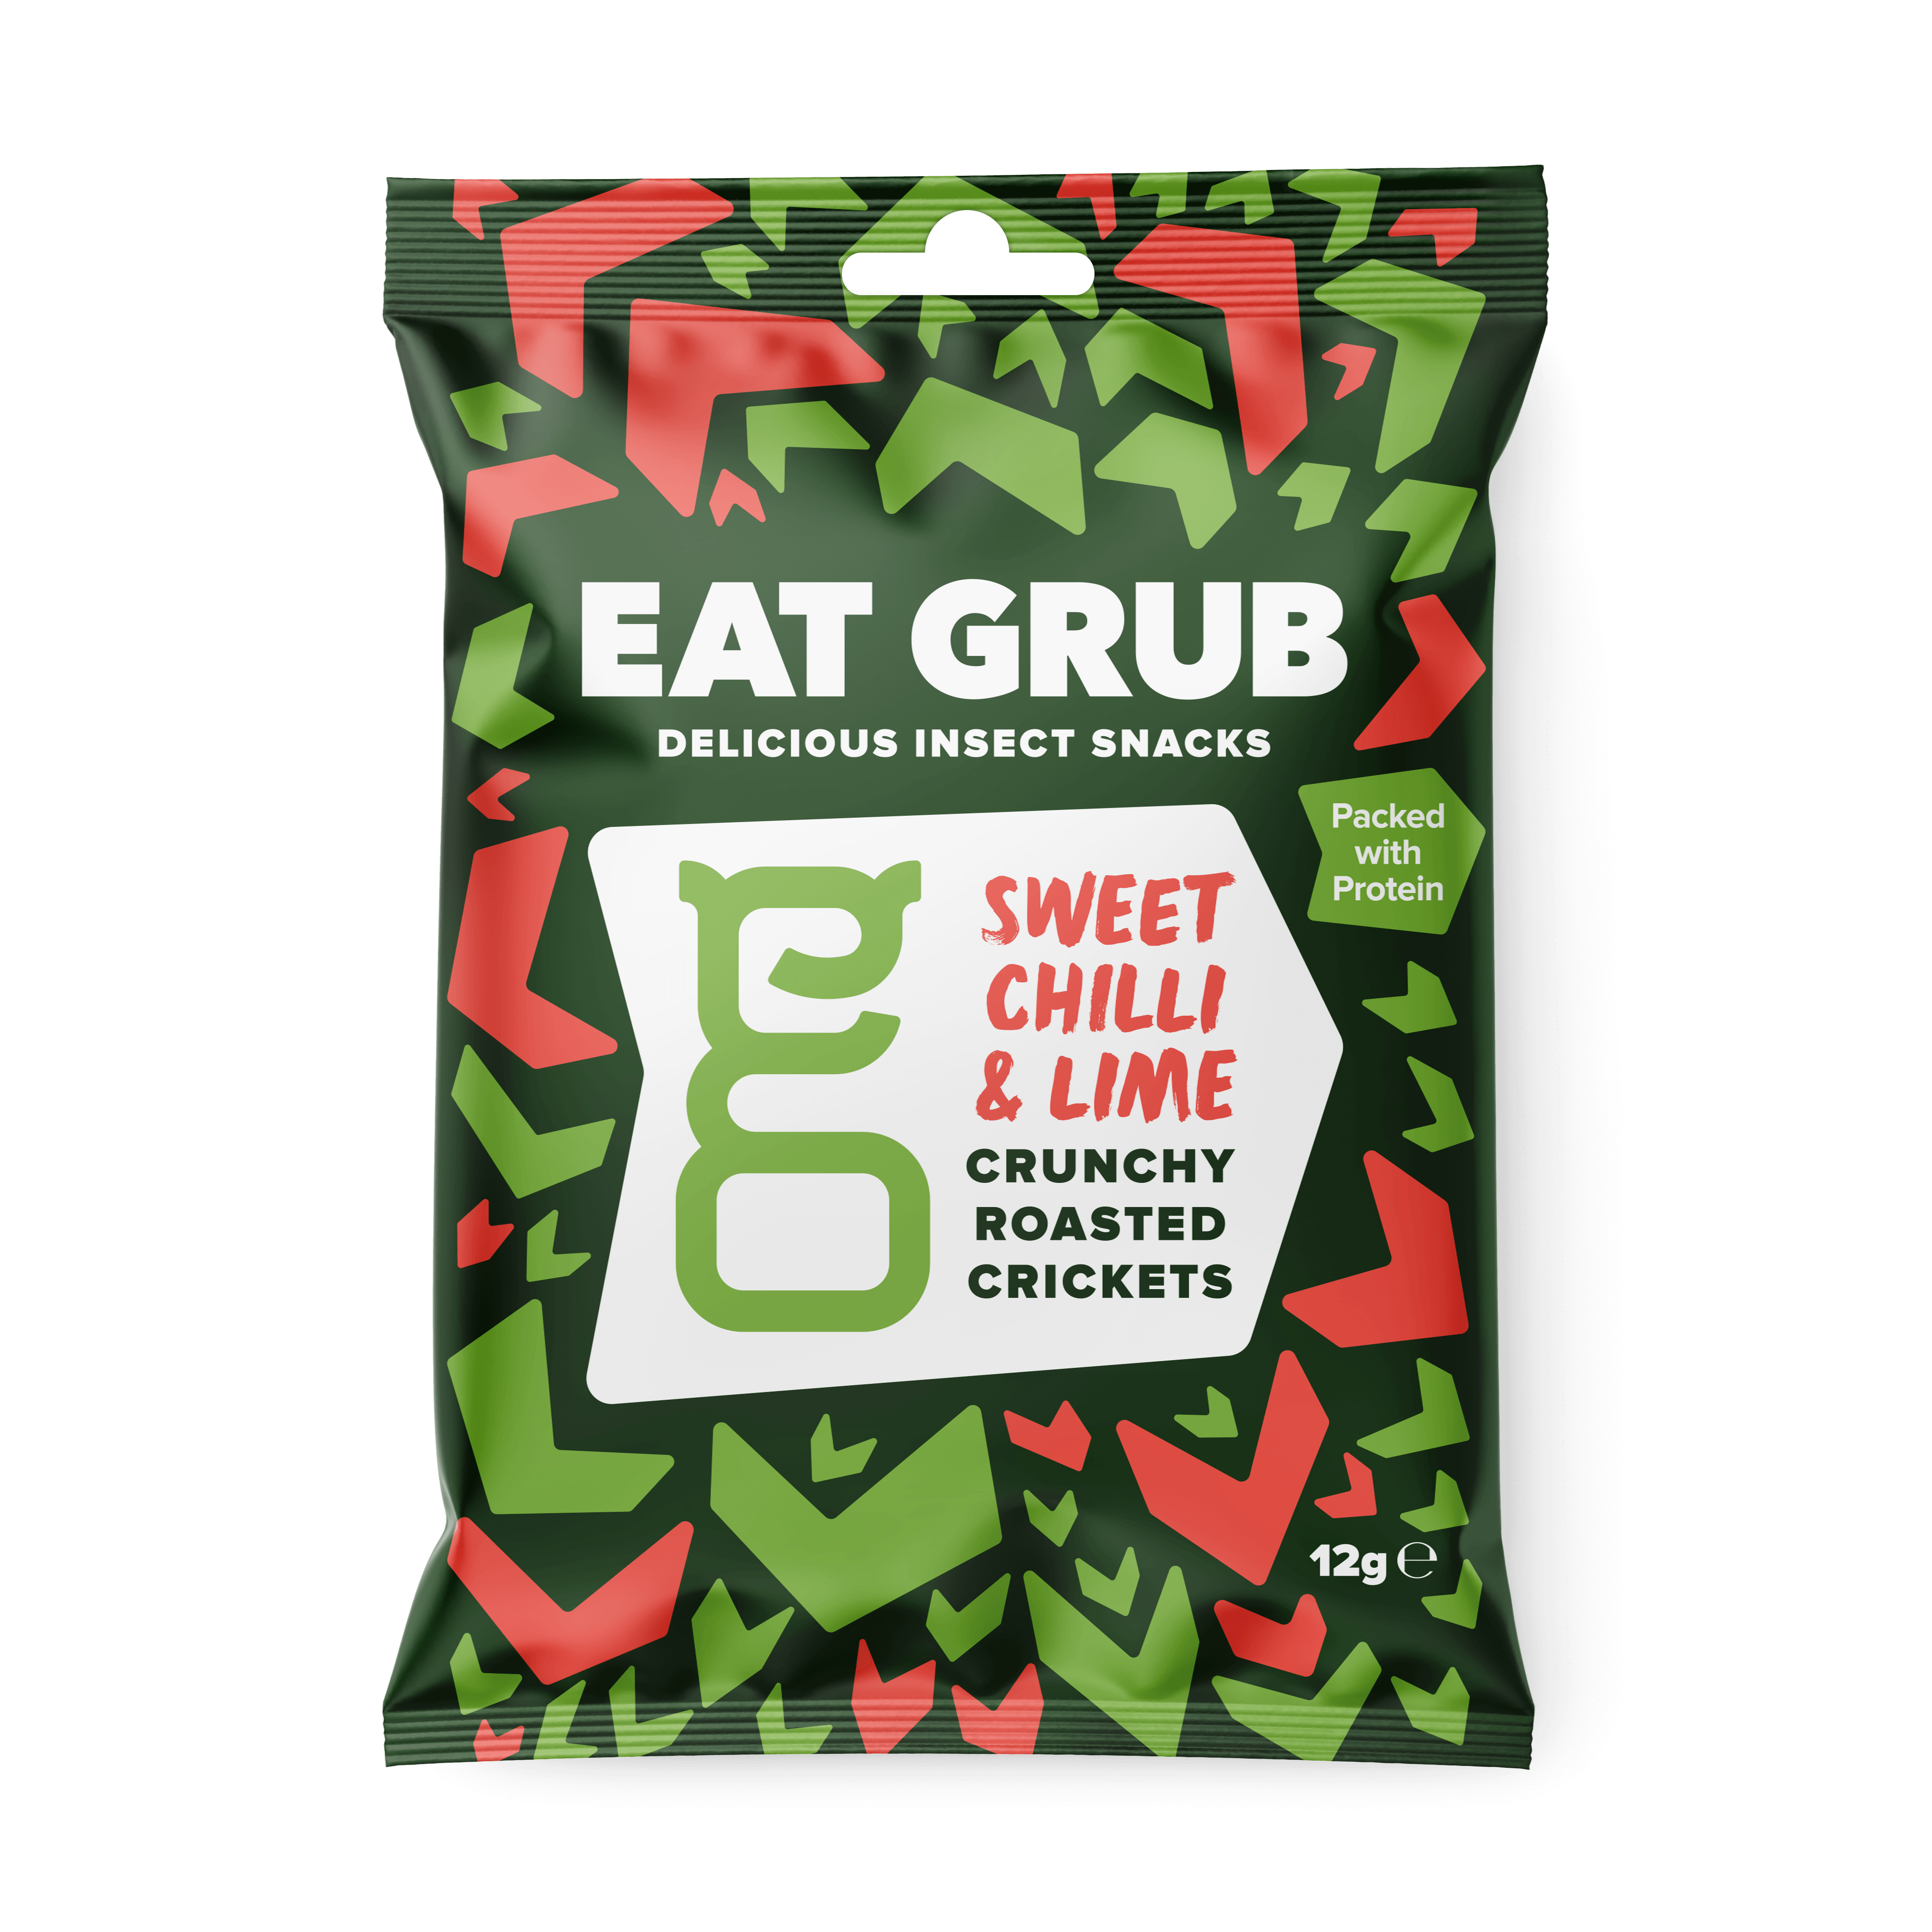 Eat Grub Crunchy Roasted Crickets Sweet Chilli & Lime - Edible insects